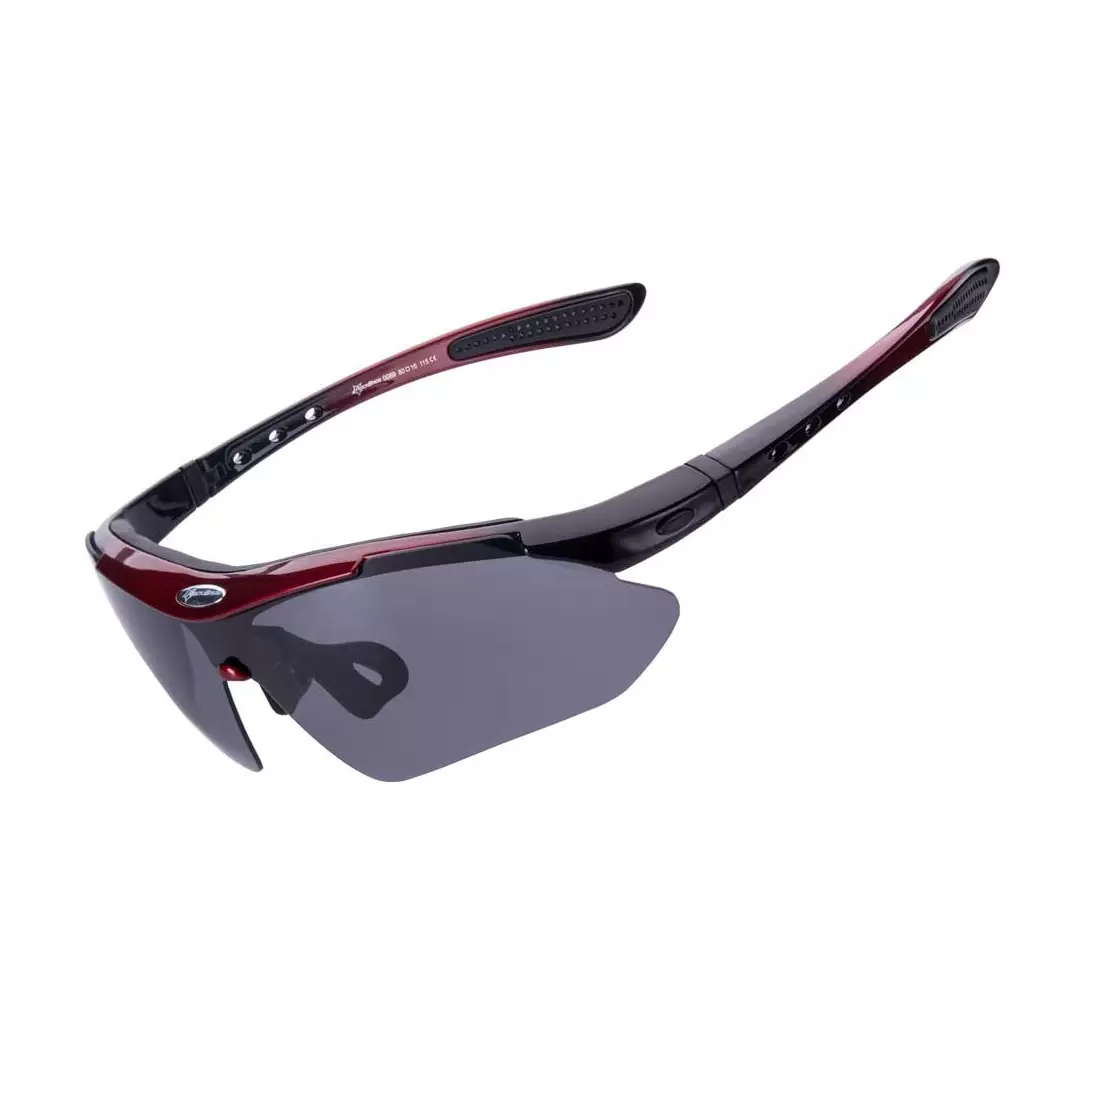 https://www.mikesport.eu/img/imagecache/20001-21000/product-media/RockBros-10001-bicycle-sports-goggles-with-polarized-5-interchangeable-lenses-black-red-78296-1100x1100.webp